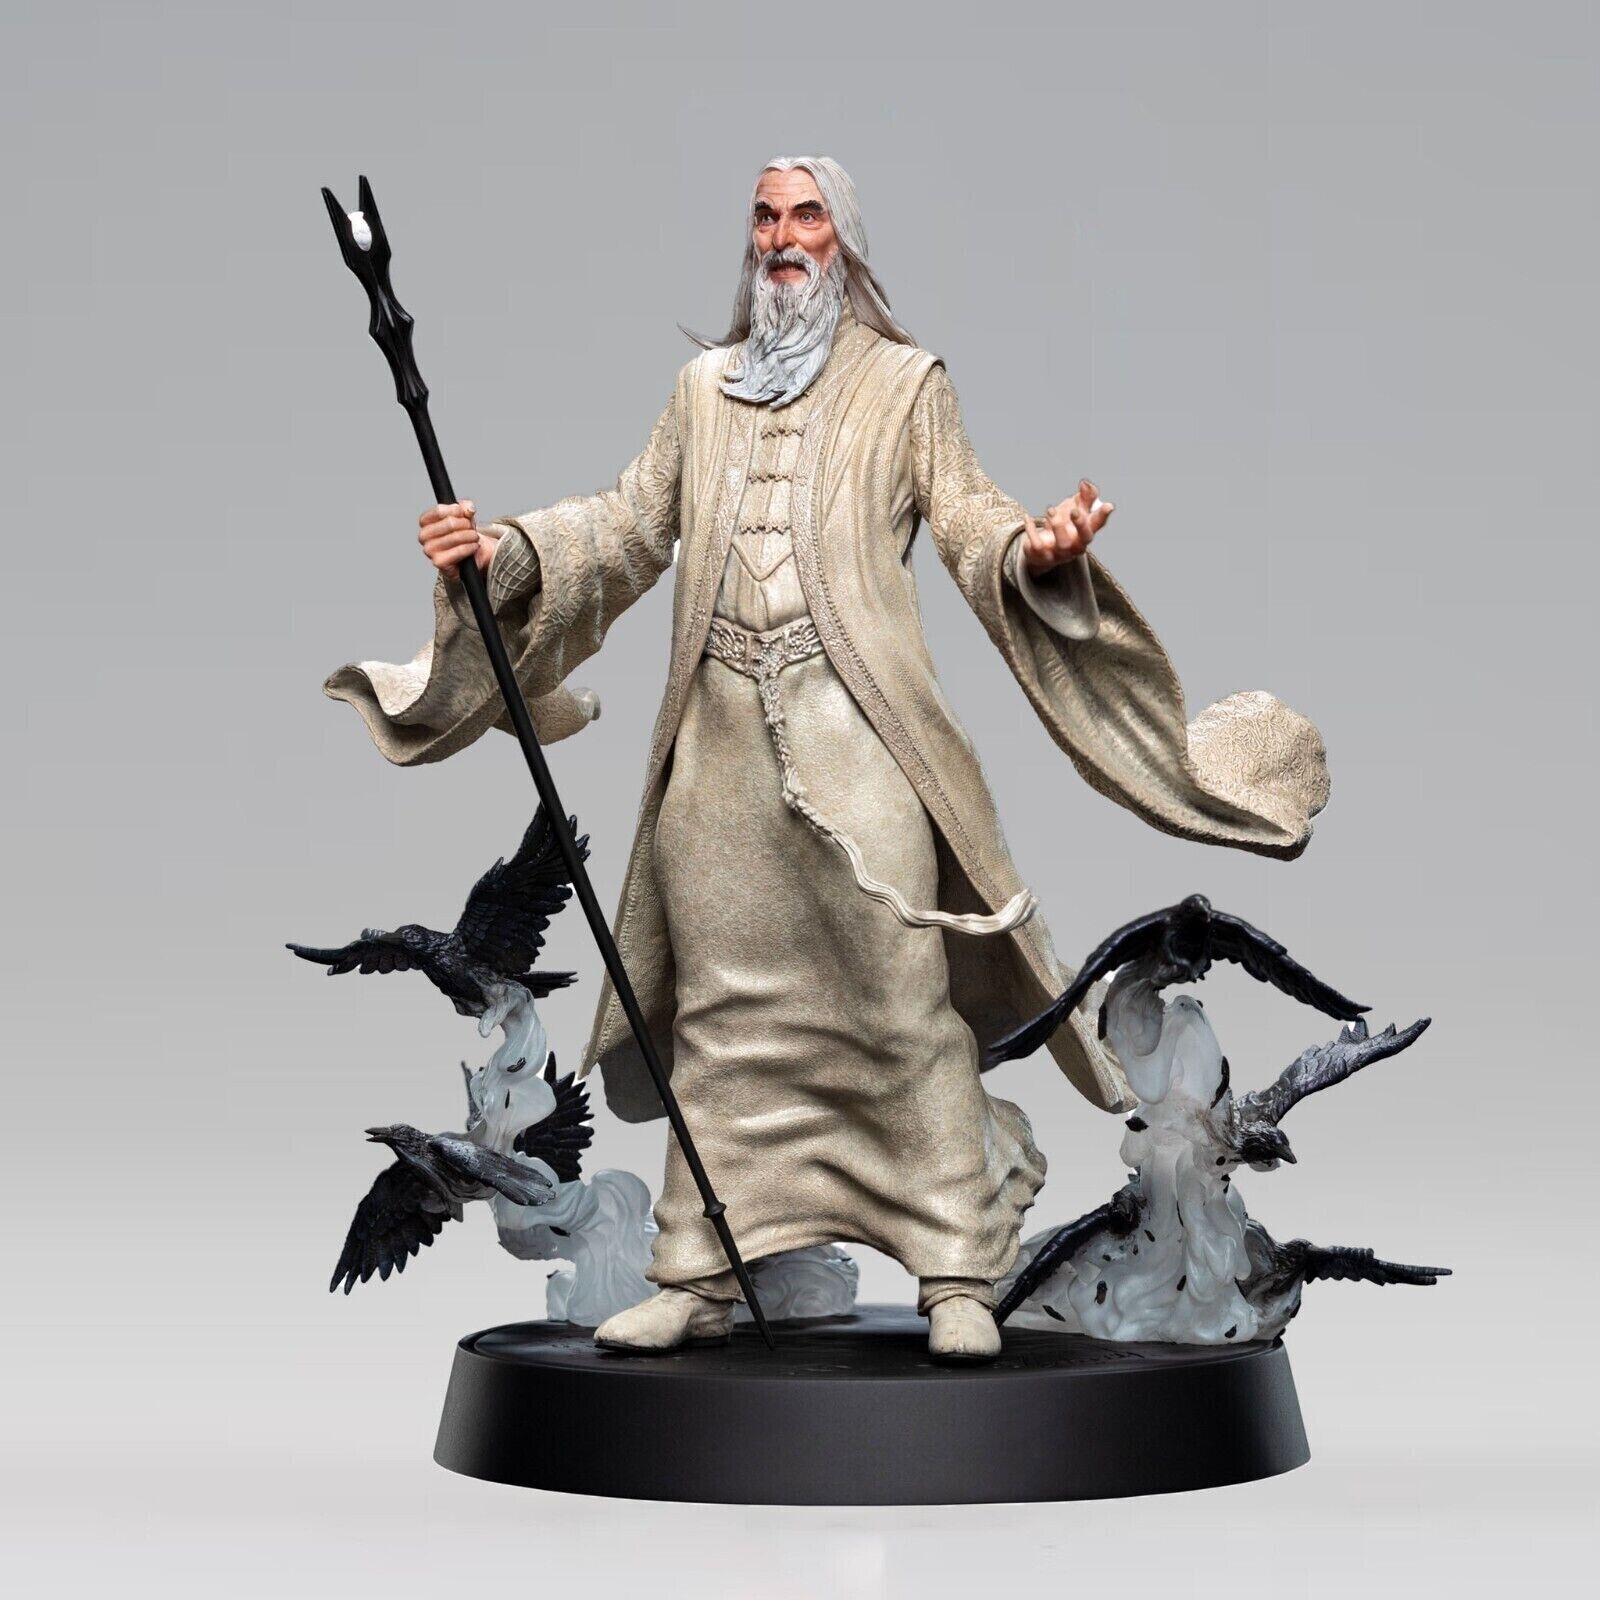 Saruman the White (The Lord of the Rings) Statue by Weta Workshop